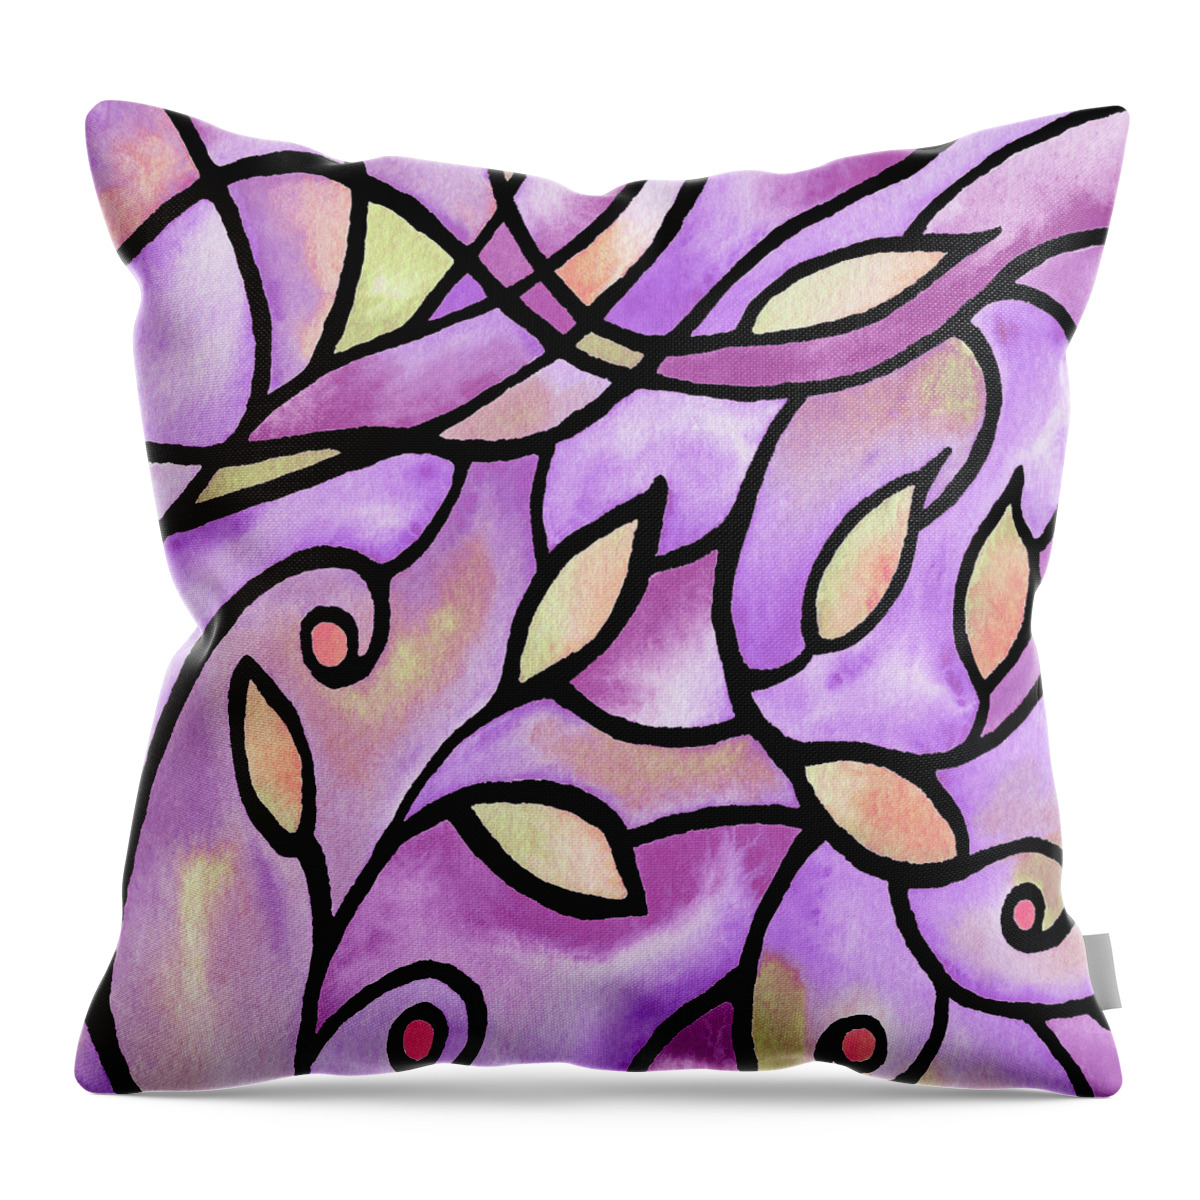 Nouveau Throw Pillow featuring the painting Leaves And Curves Art Nouveau Style XI by Irina Sztukowski